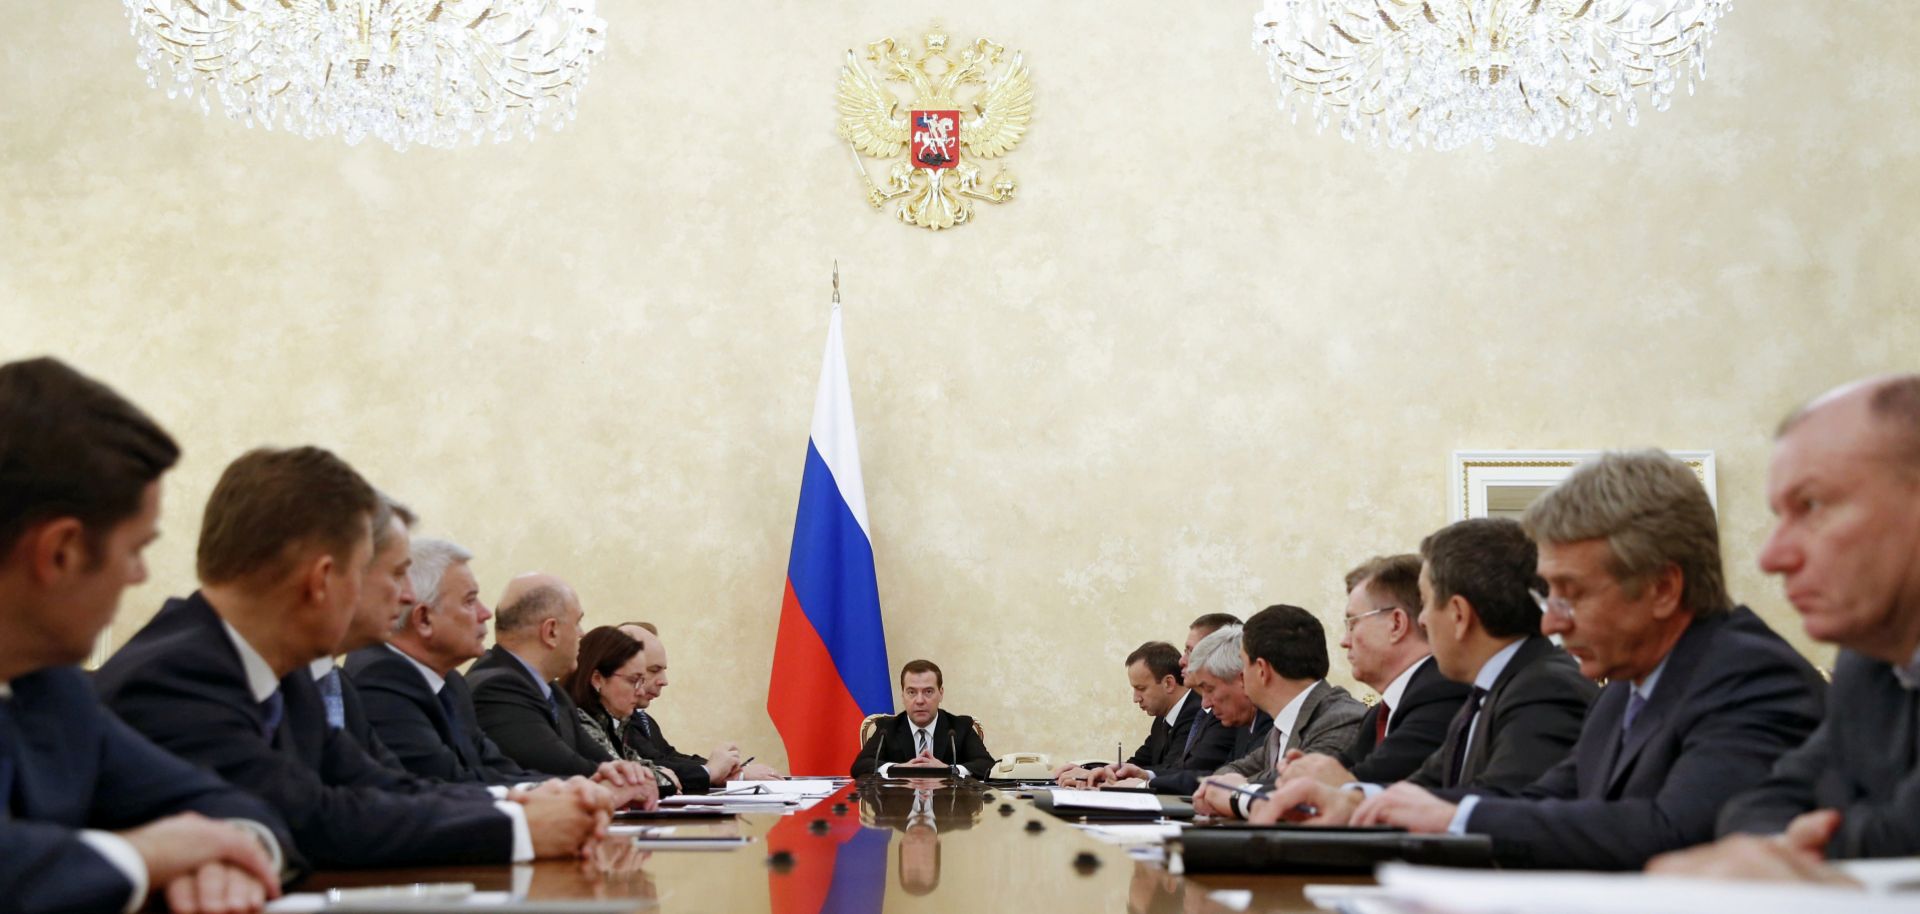 Russian Prime Minister Dmitri Medvedev (C) meets with members of the government's finance and economy ministries in 2014 to discuss policy